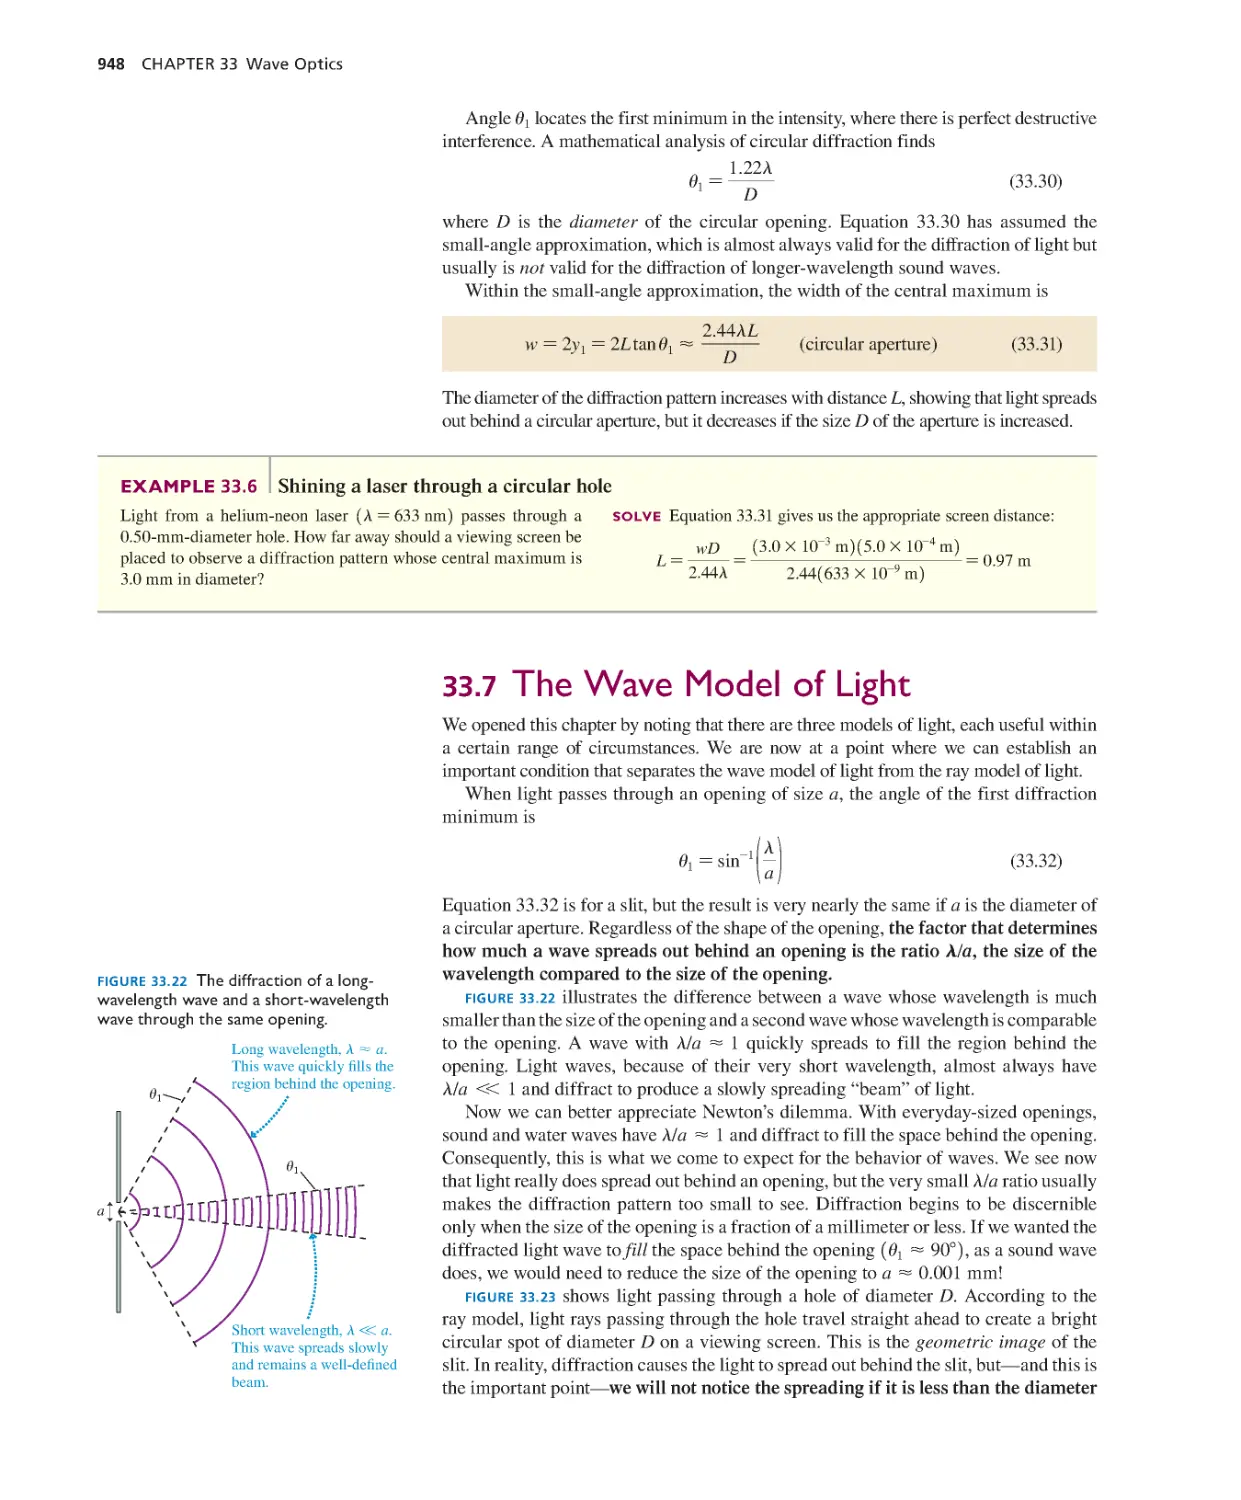 33.7. The Wave Model of Light